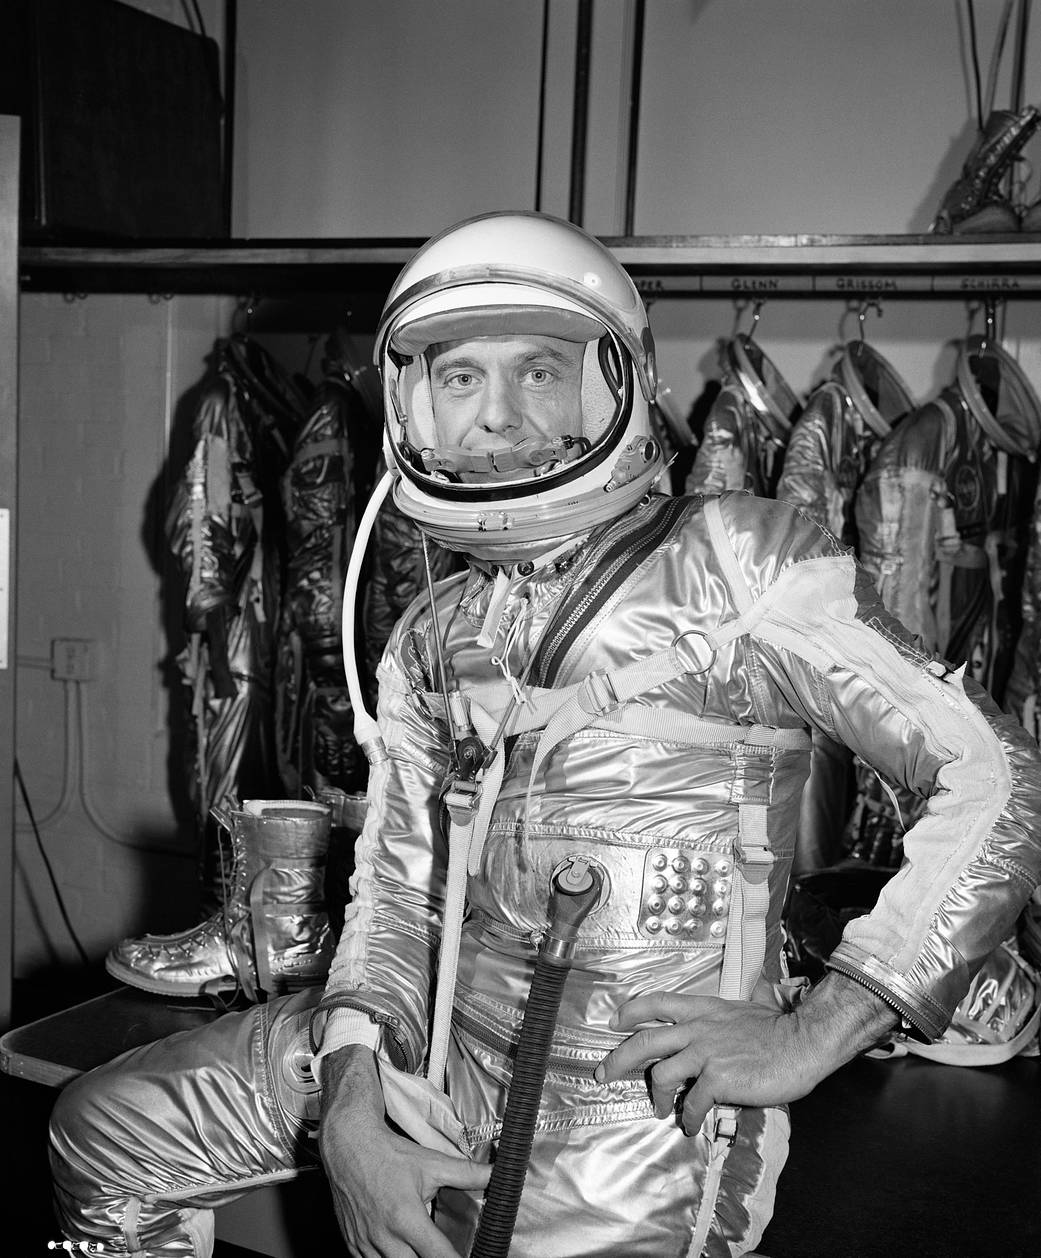 Closeup photo of astronaut Alan Shepard in pressure suit indoors with rack of pressure suits in background